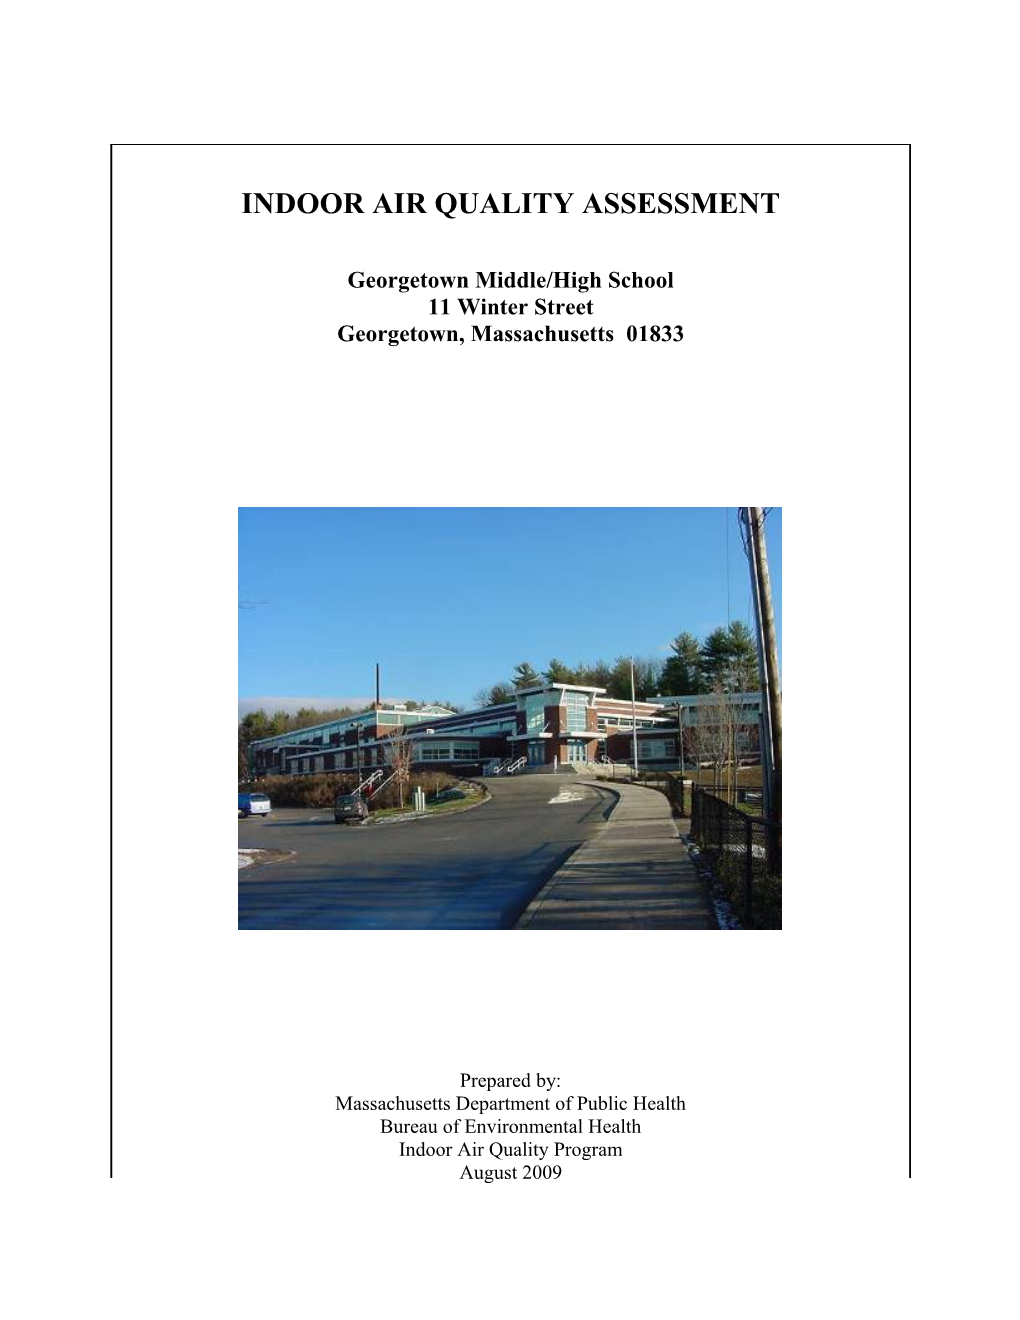 INDOOR AIR QUALITY ASSESSMENT -Georgetown Middle/High School, 11 Winter Street, Georgetown